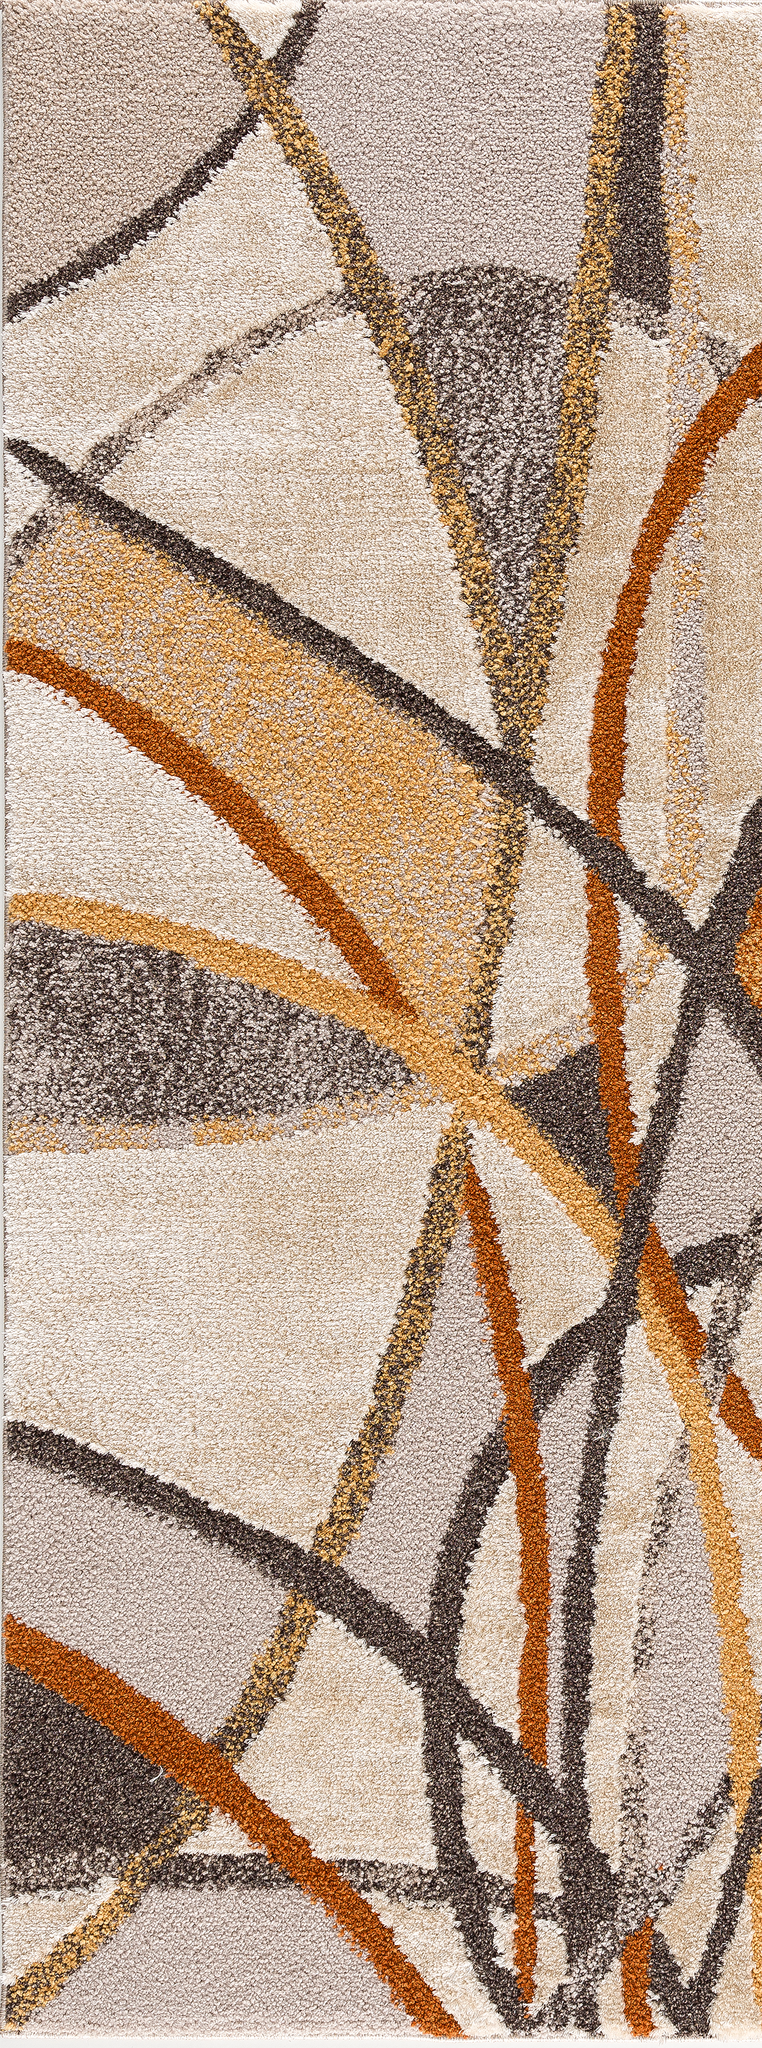 Area rug | Chennie Chic Picasso 5x8 | 3x8 | By Mother Ruggers.com | Machine Washable | Chenille Woven | Burnt Orange | Dark Yellow |Brown | Beige | Off White | Drawn Lines | Pet Friendly | Kid Friendly | Machine Wash Line Dry | Living Room | Kitchen | Bedroom | Moderate Traffic | High Traffic mat recommended | Three year warranty with proper care | Shake or light Vacuum | Machine Wash | Dry Flat or Line Dry | Dries fast